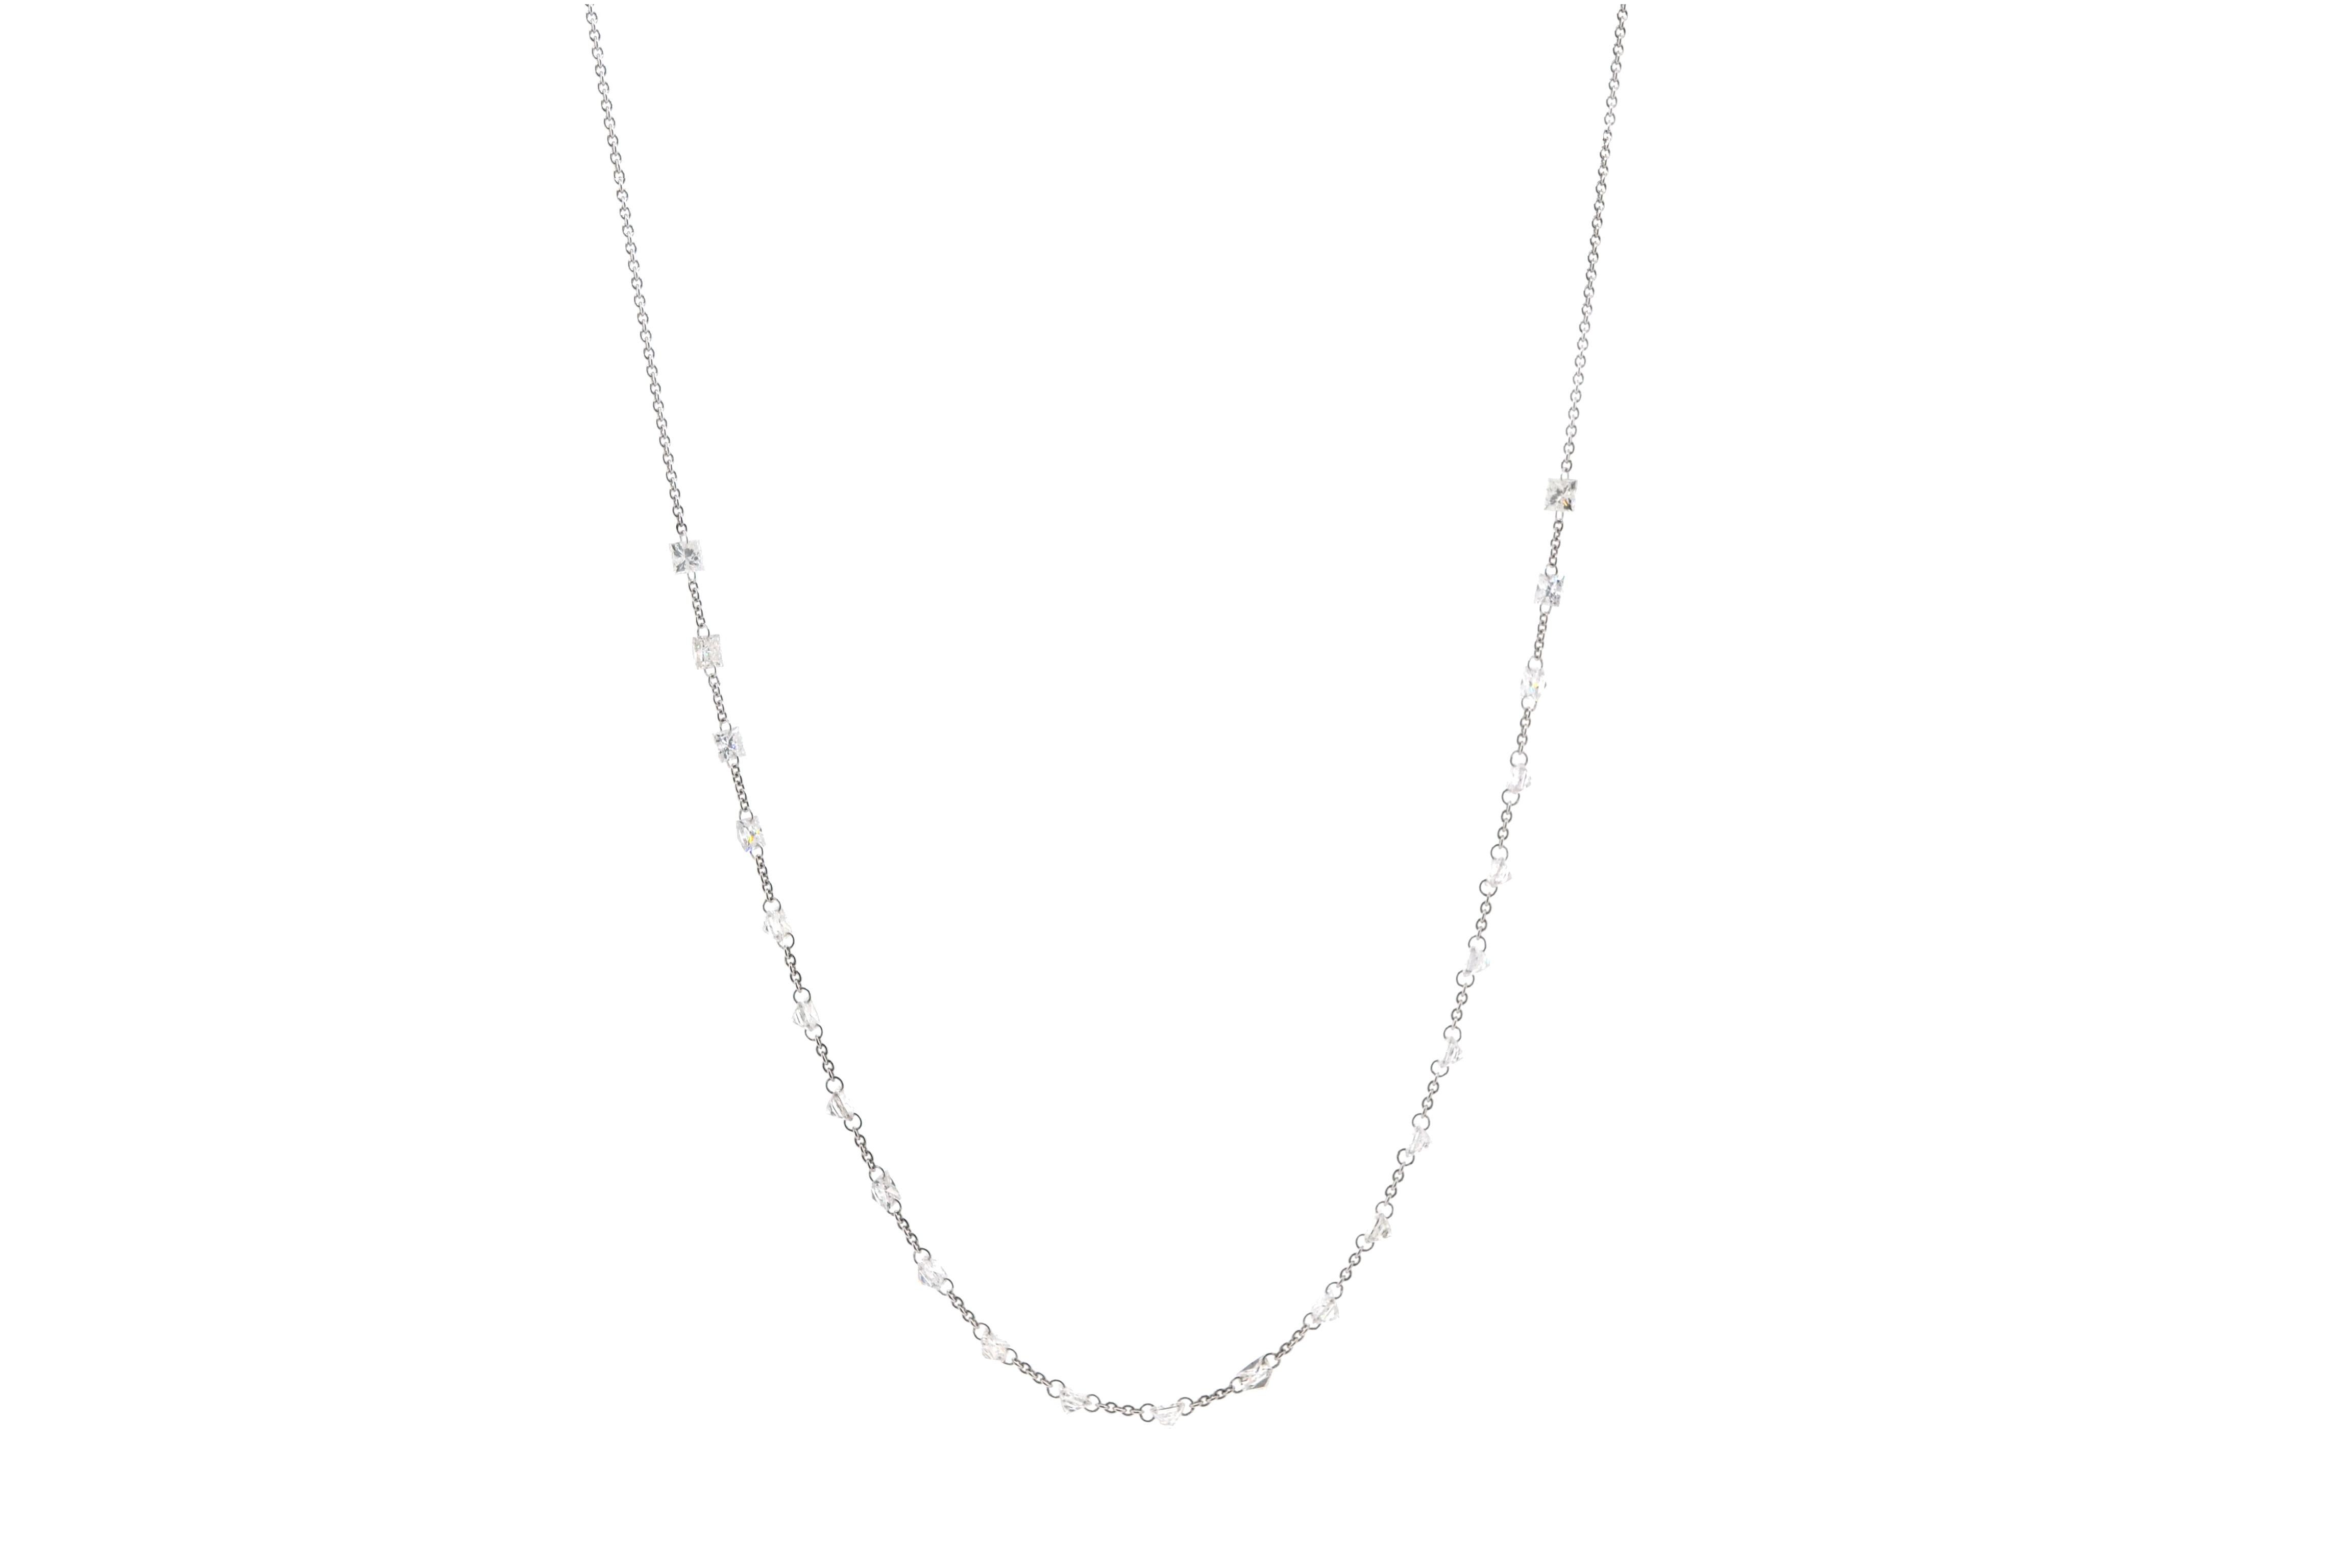 JR 3.37 Carat White Drill Diamond 18 Karat White Gold Necklace

The necklace is made with White Princess cut Drilled Diamond. It has slider ball near the clasp to adjust the length from 14 Inch to 18.5 Inch. The necklace can be worn every day use,